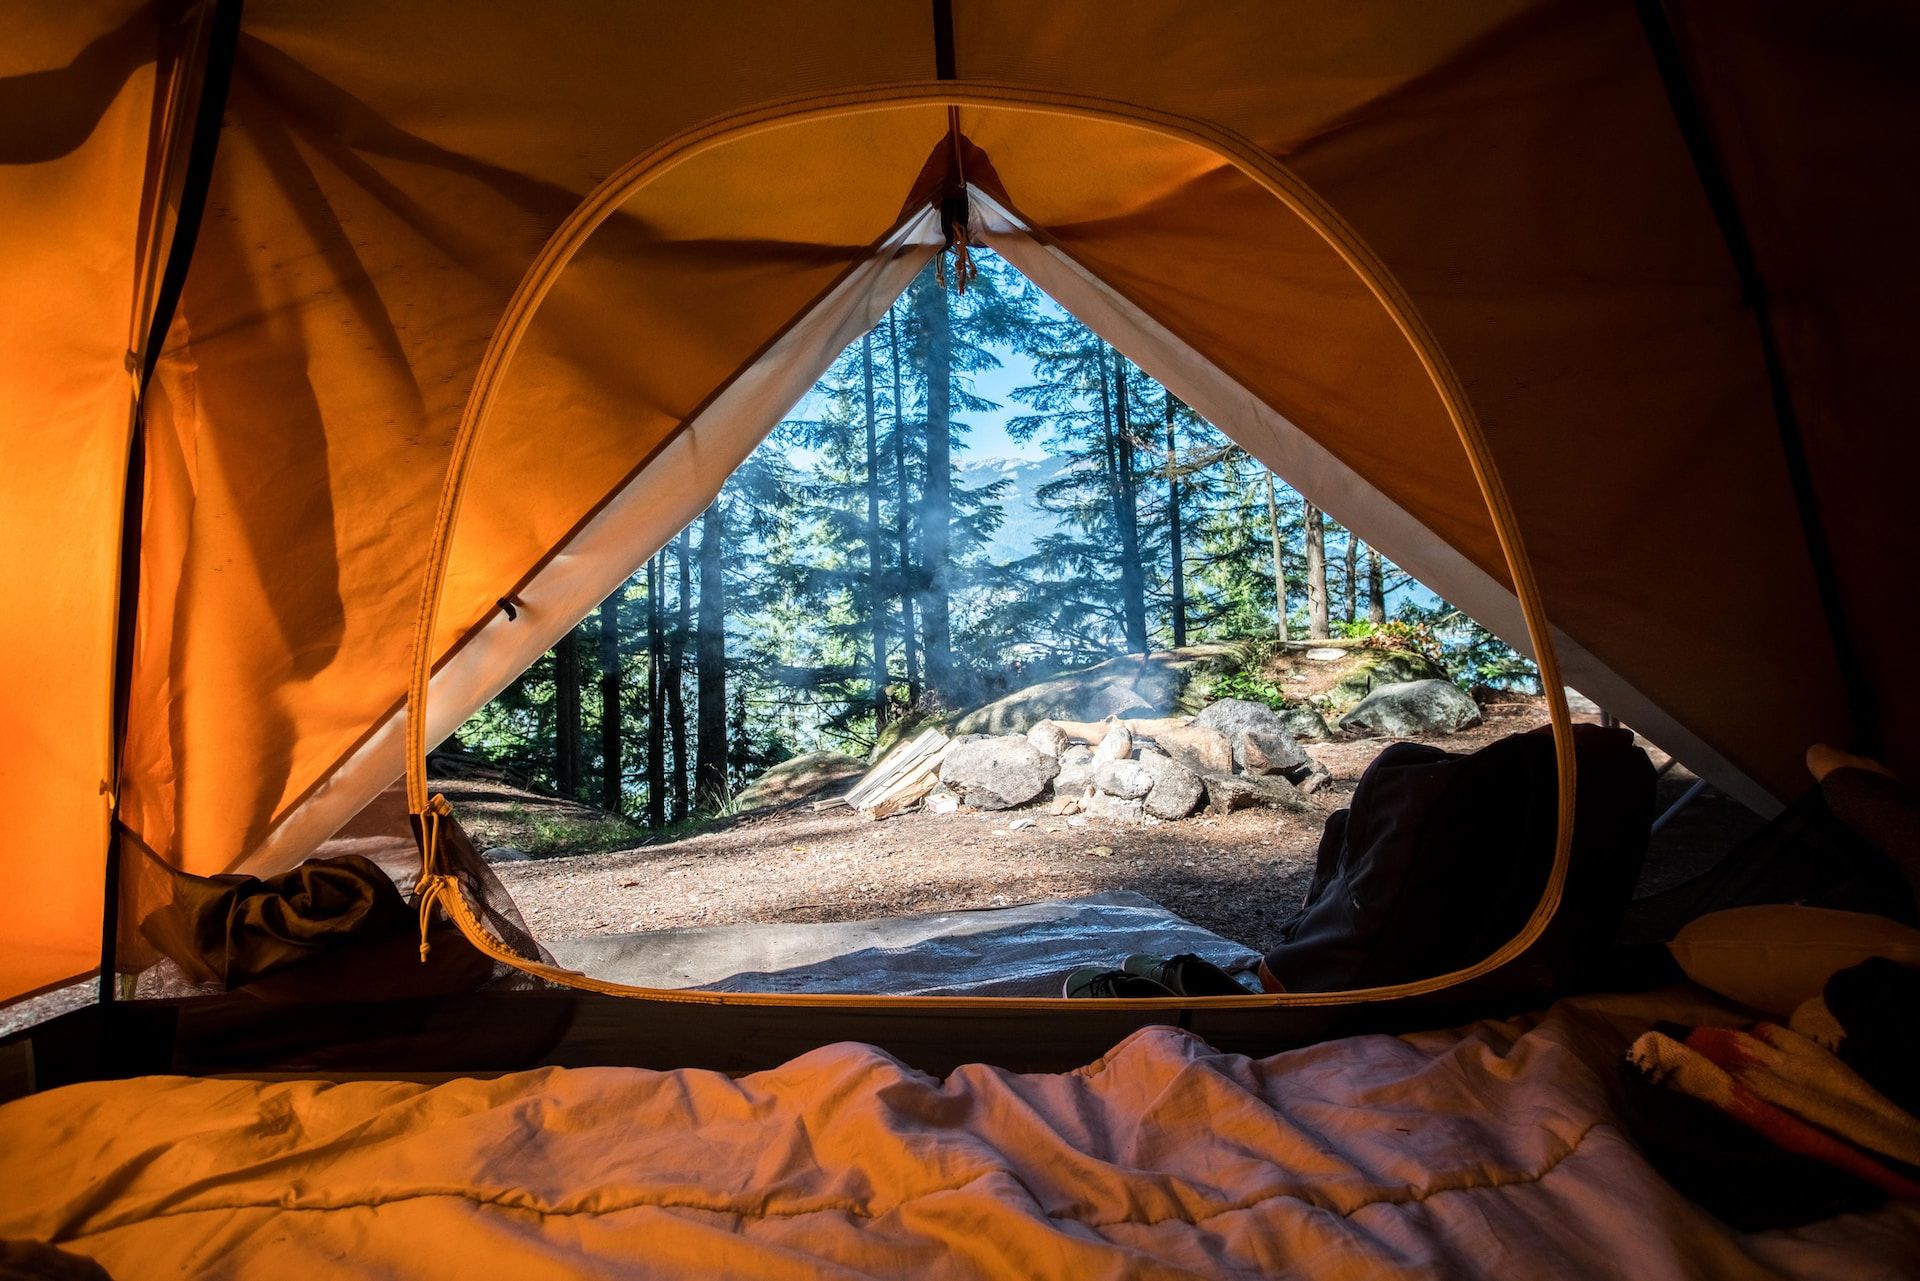 Camping in the forests and mountains